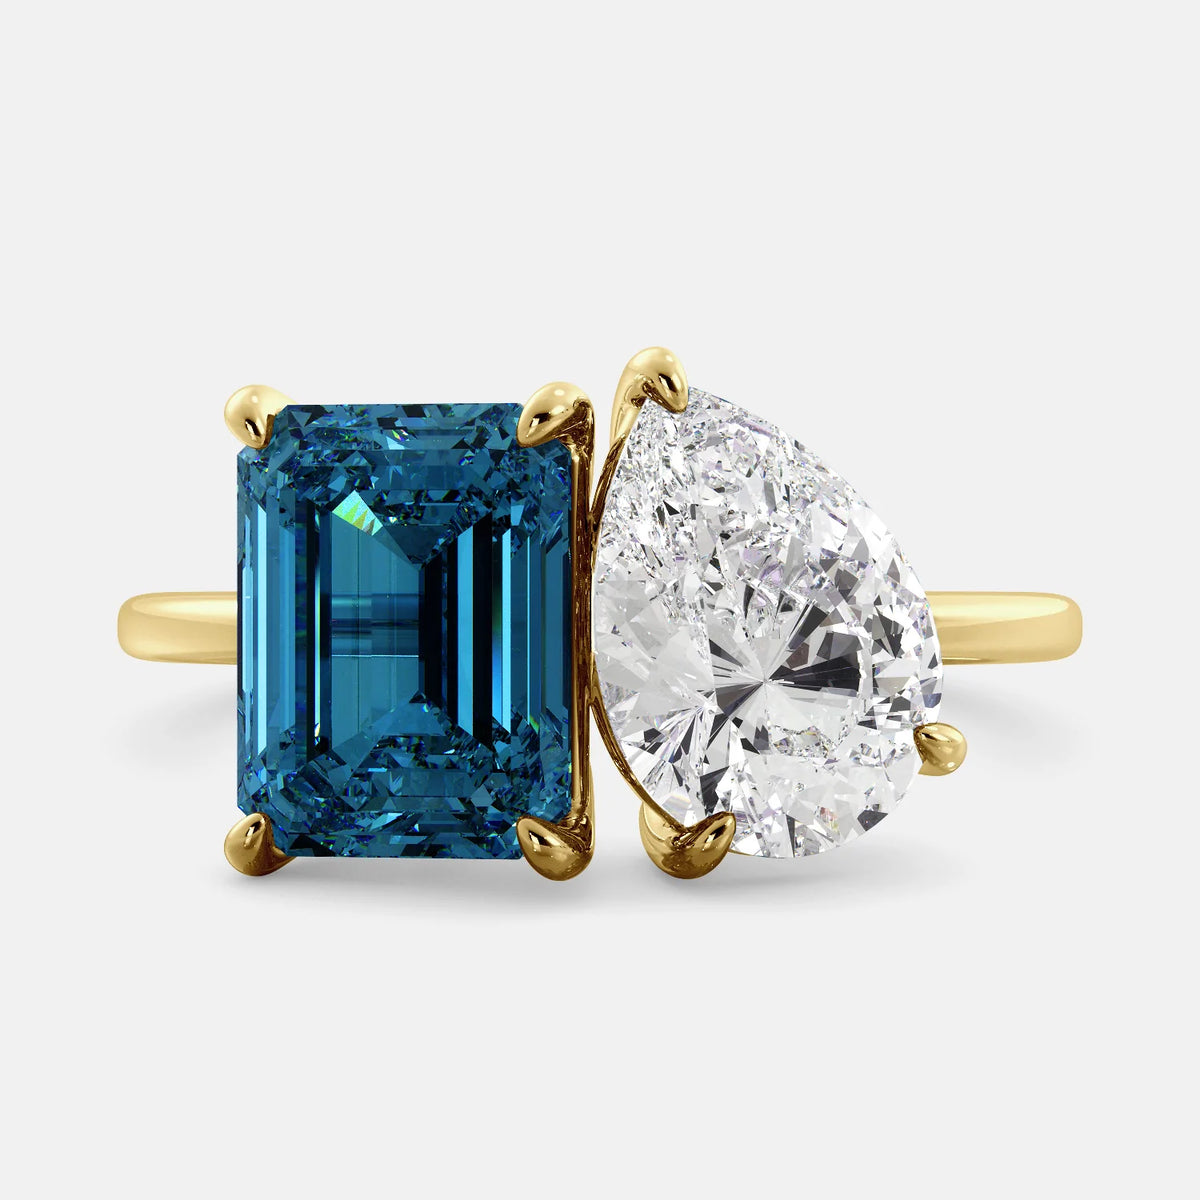 A toi et moi ring with a London blue topaz stone in emerald cut and a pear-shaped stone. The London blue topaz is a bright blue color and the pear-shaped stone can be customized to represent the birth month stone of the wearer or a loved one. The ring is made of 14k yellow gold and available in all sizes. This ring is a perfect gift for any occasion, and it can be customized to make it truly unique.